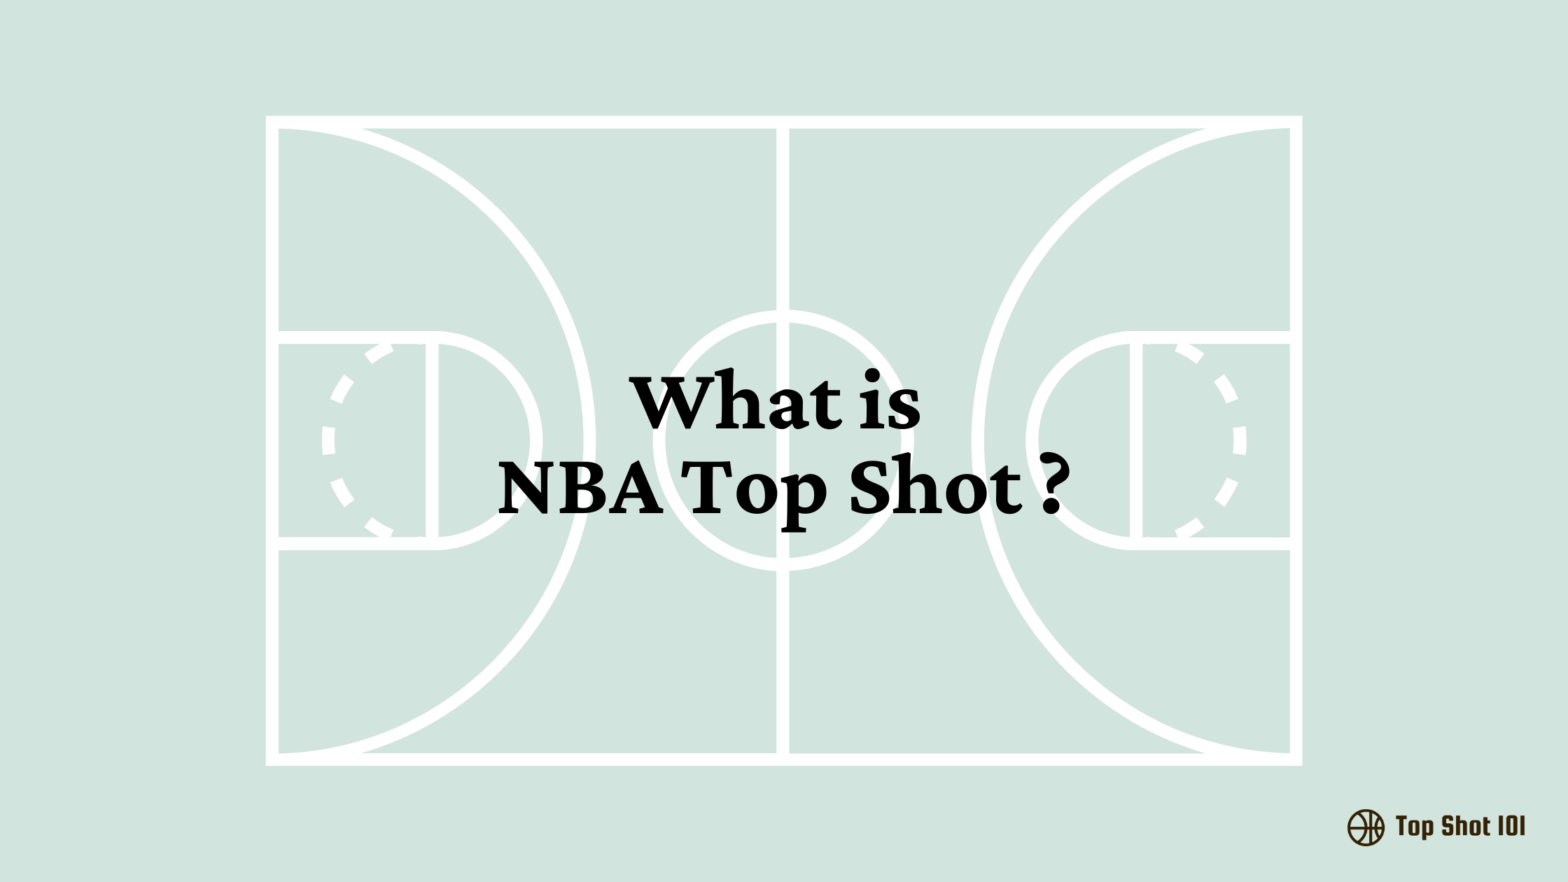 What is NBA Top Shot?